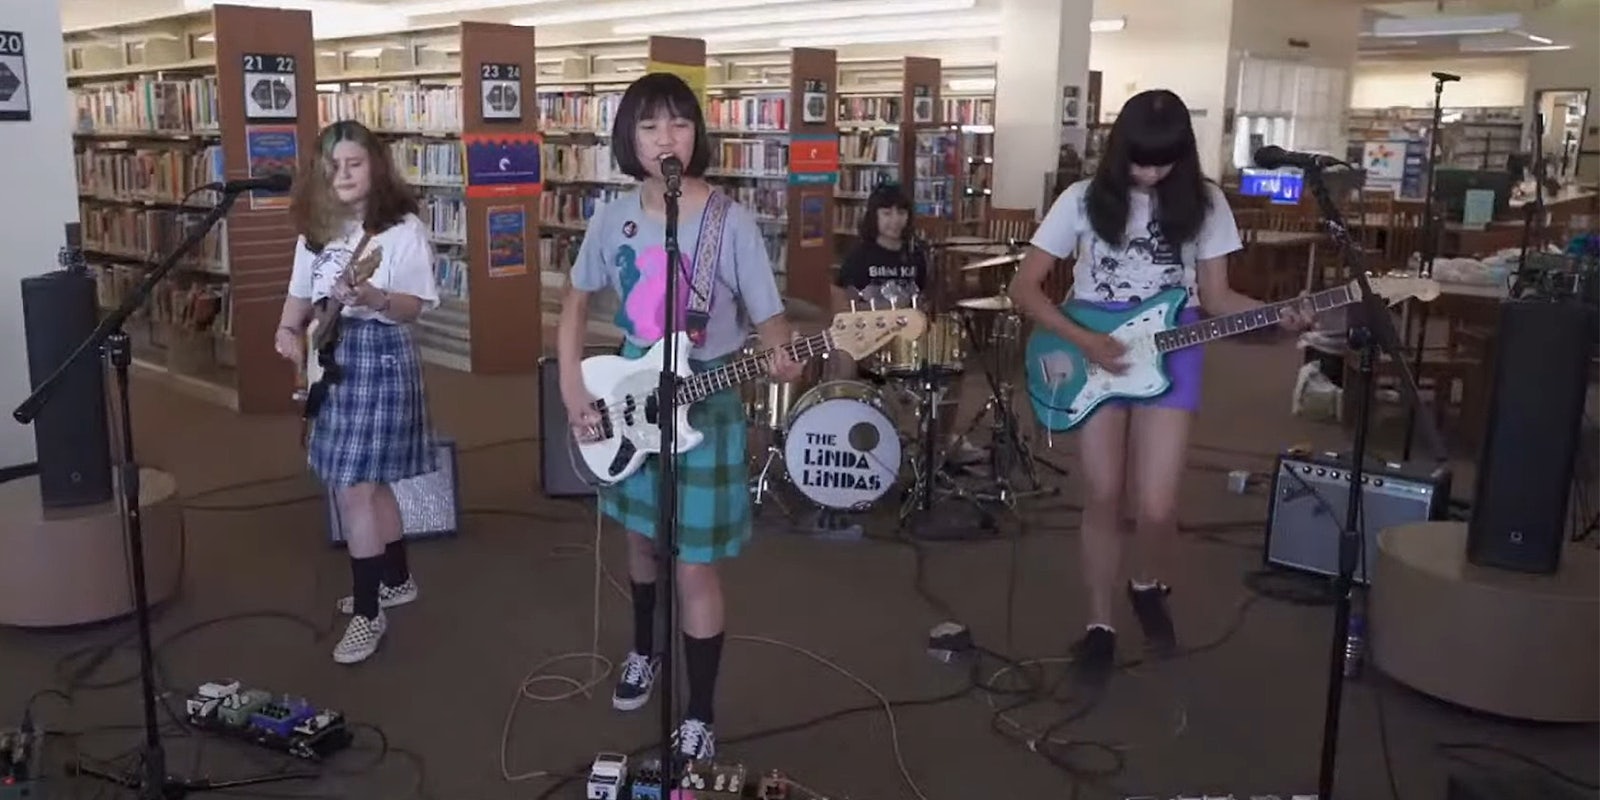 Four young girls perform on bass, guitars, and drums in a public library.